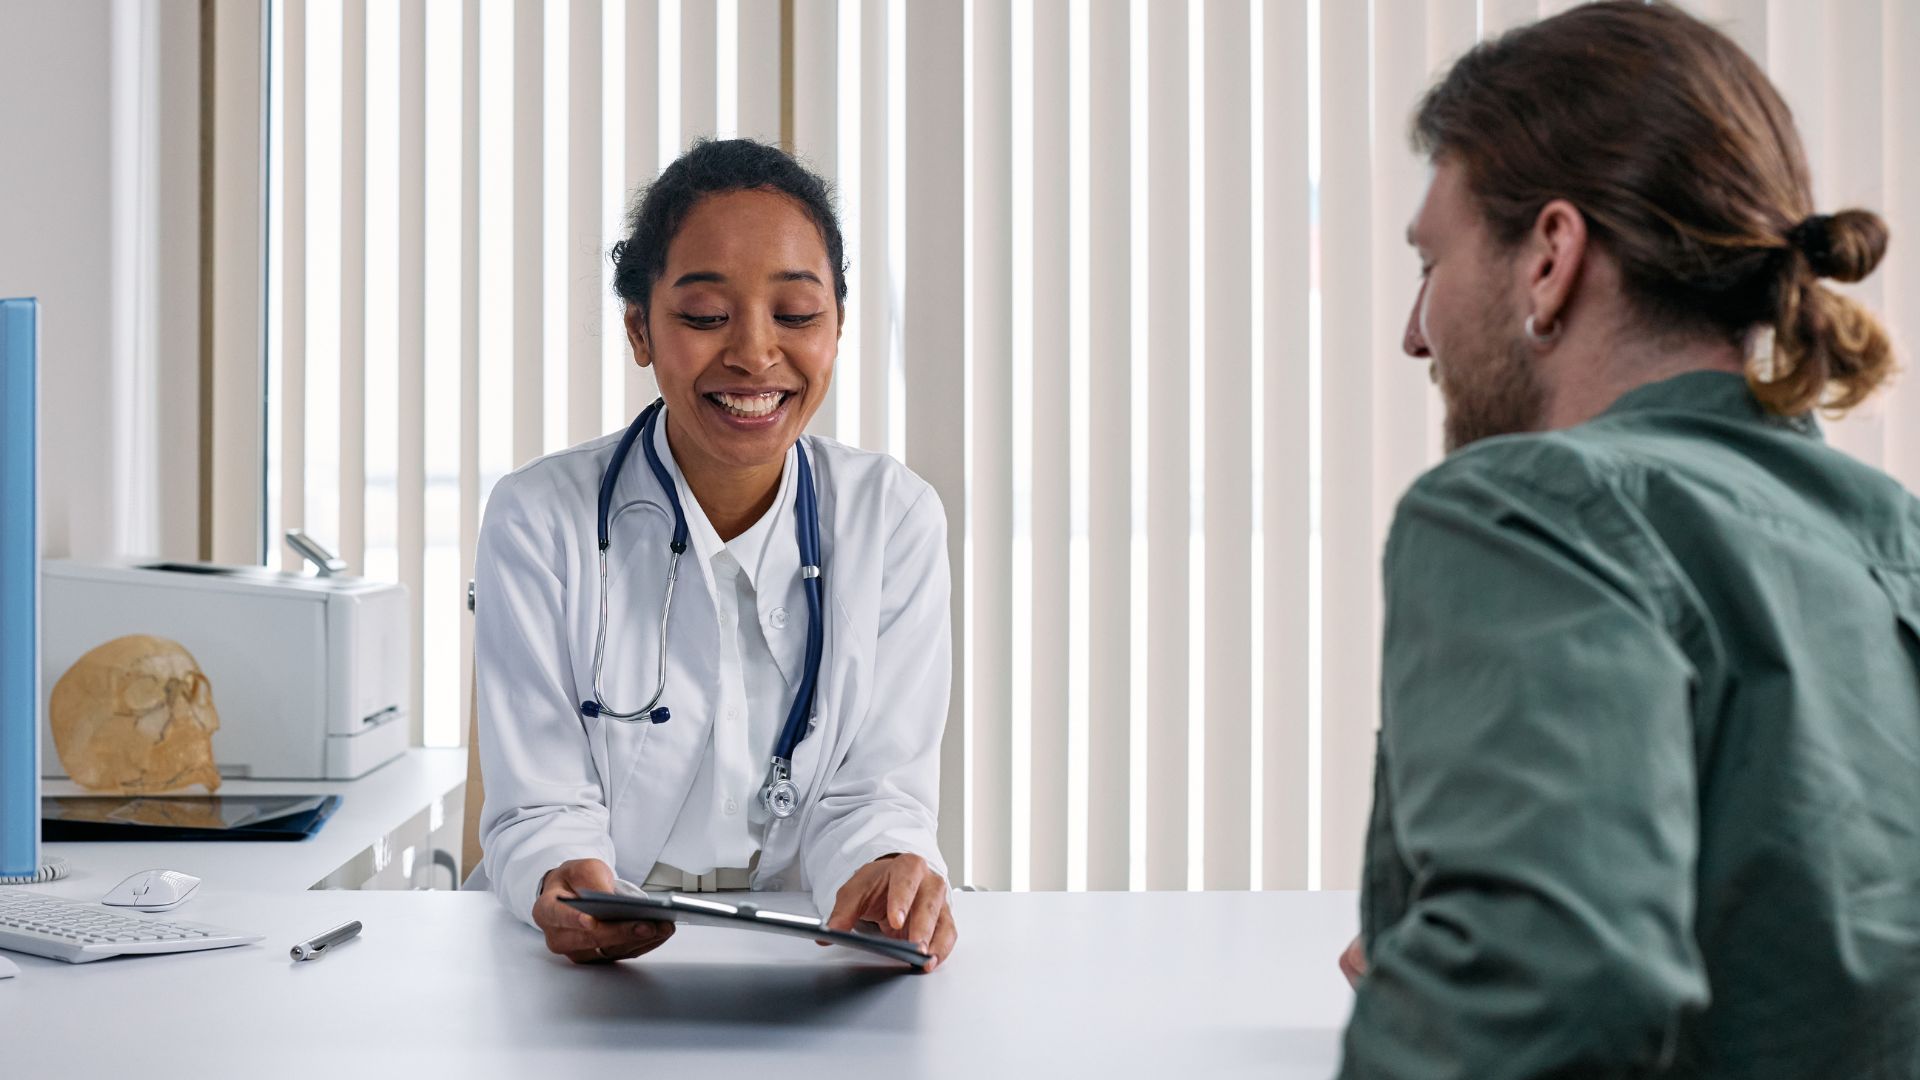 5 Tips for Enhancing Communication Between Patients and Providers